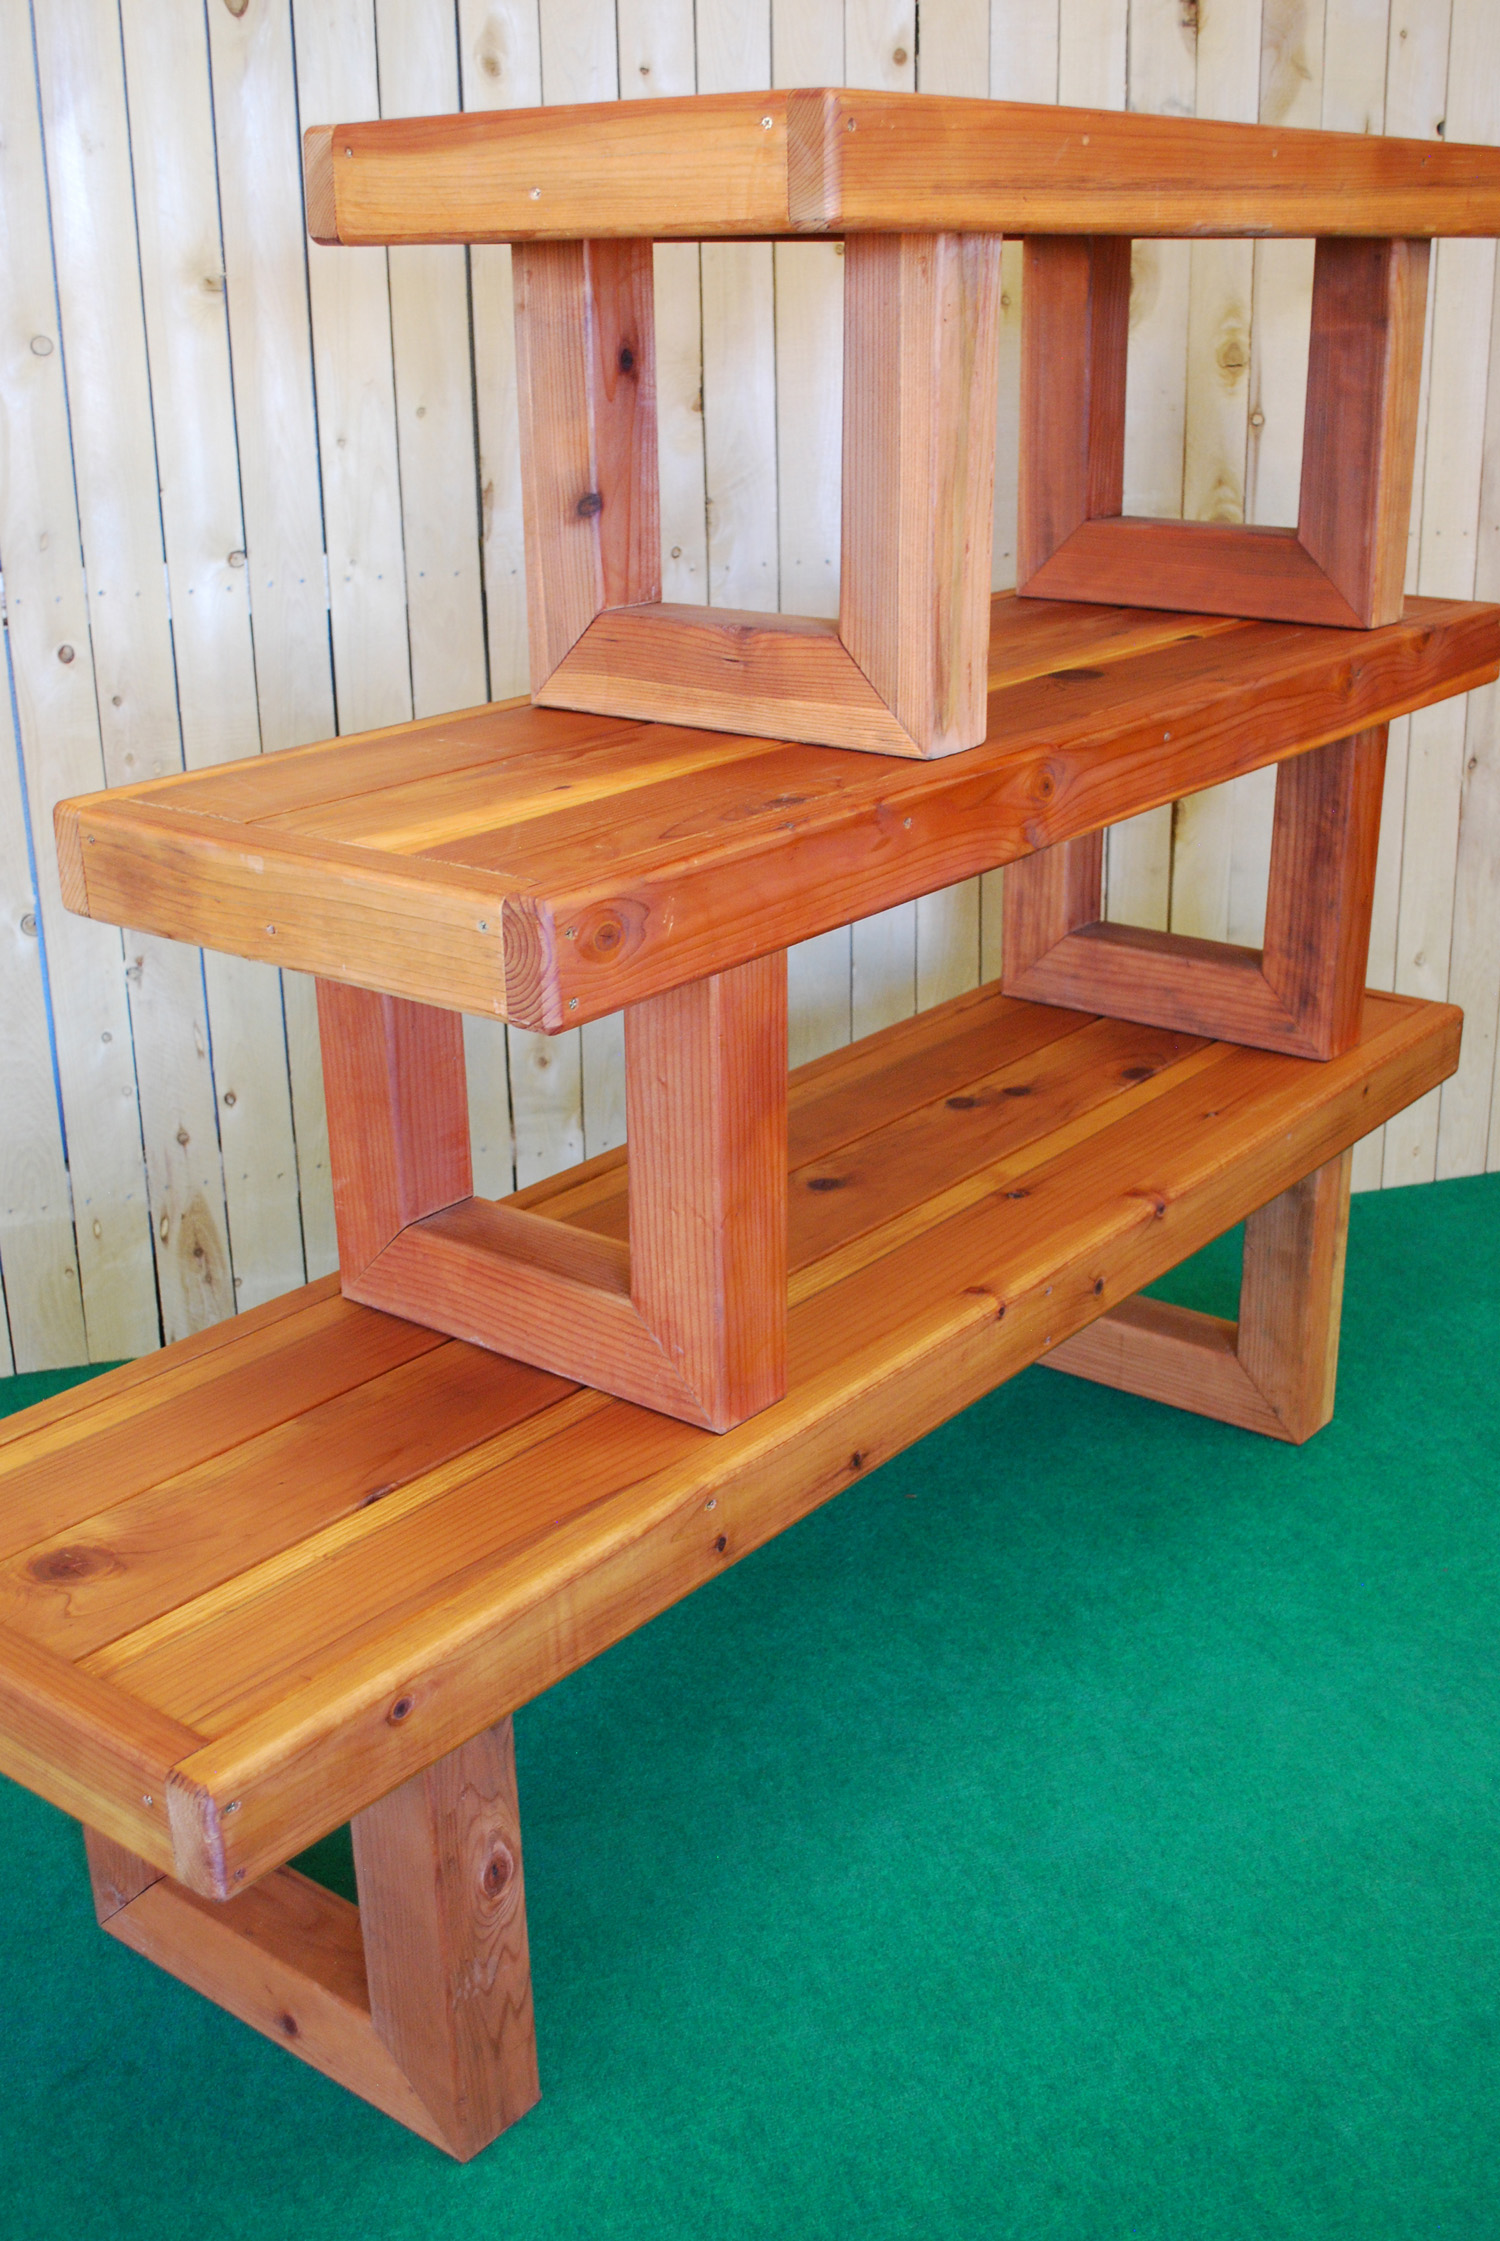 redwood contempo bench (all 3 sizes)